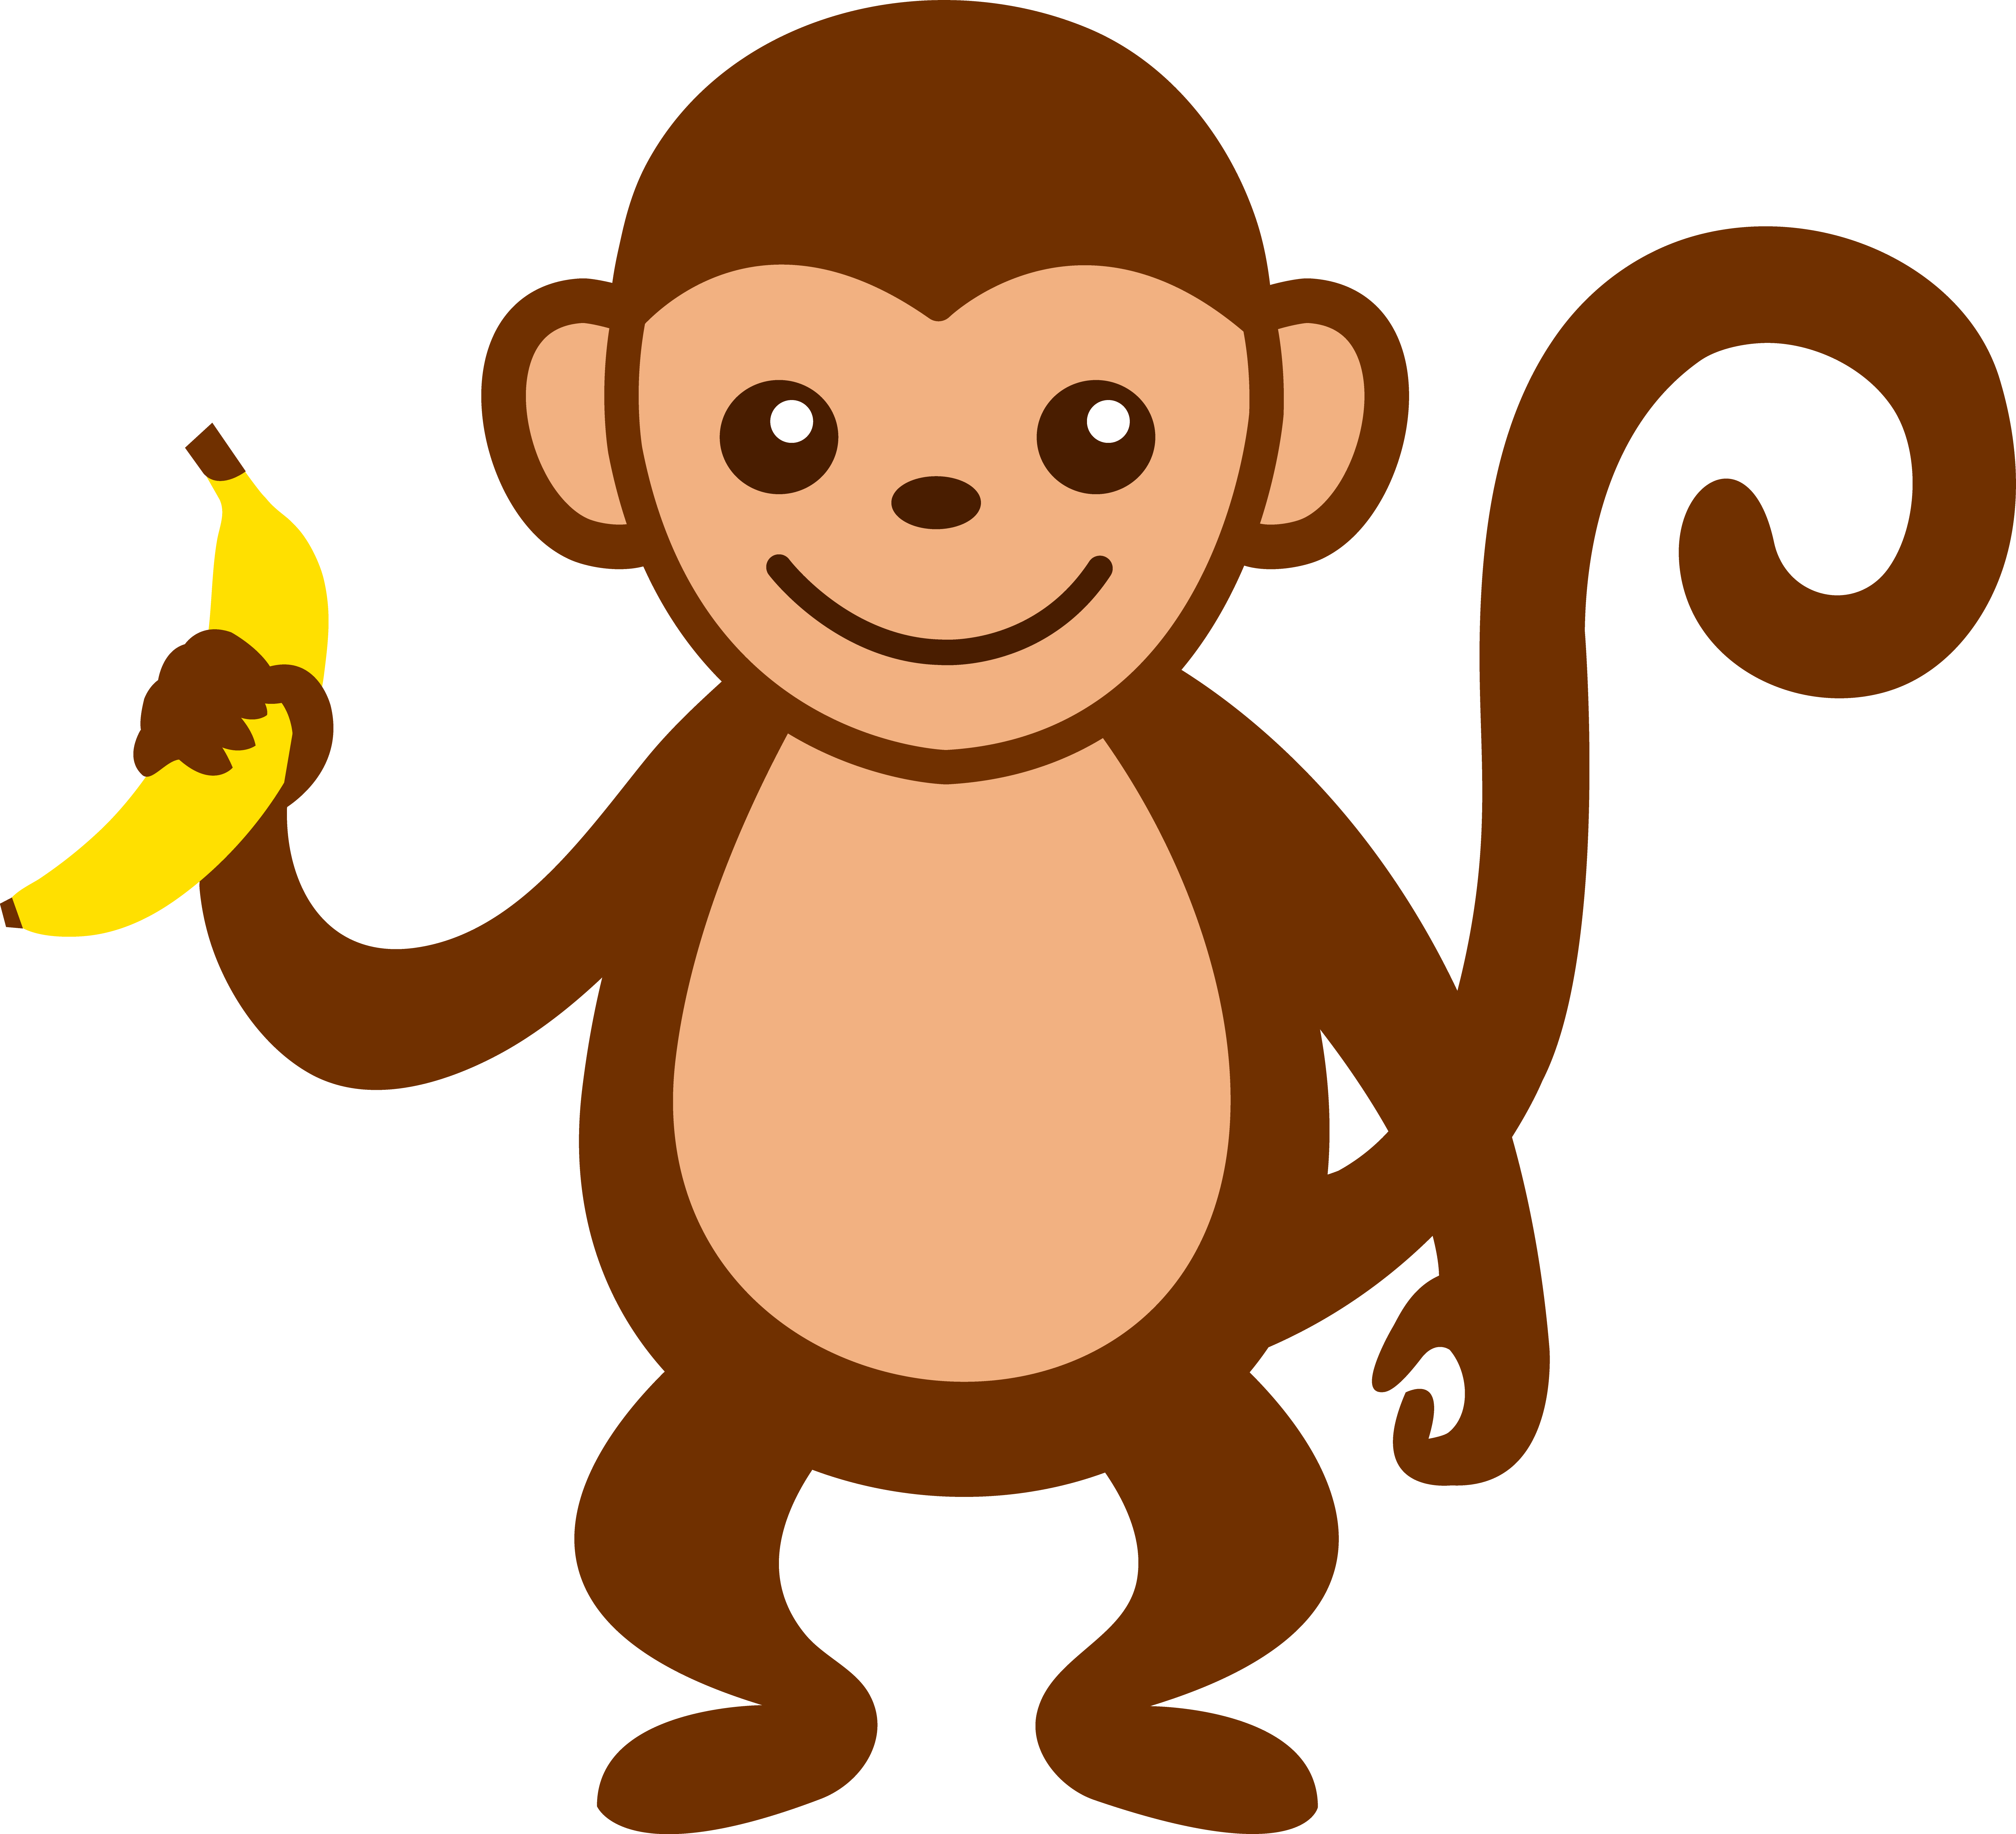 Cute Monkey Cartoon Images - Cliparts.co